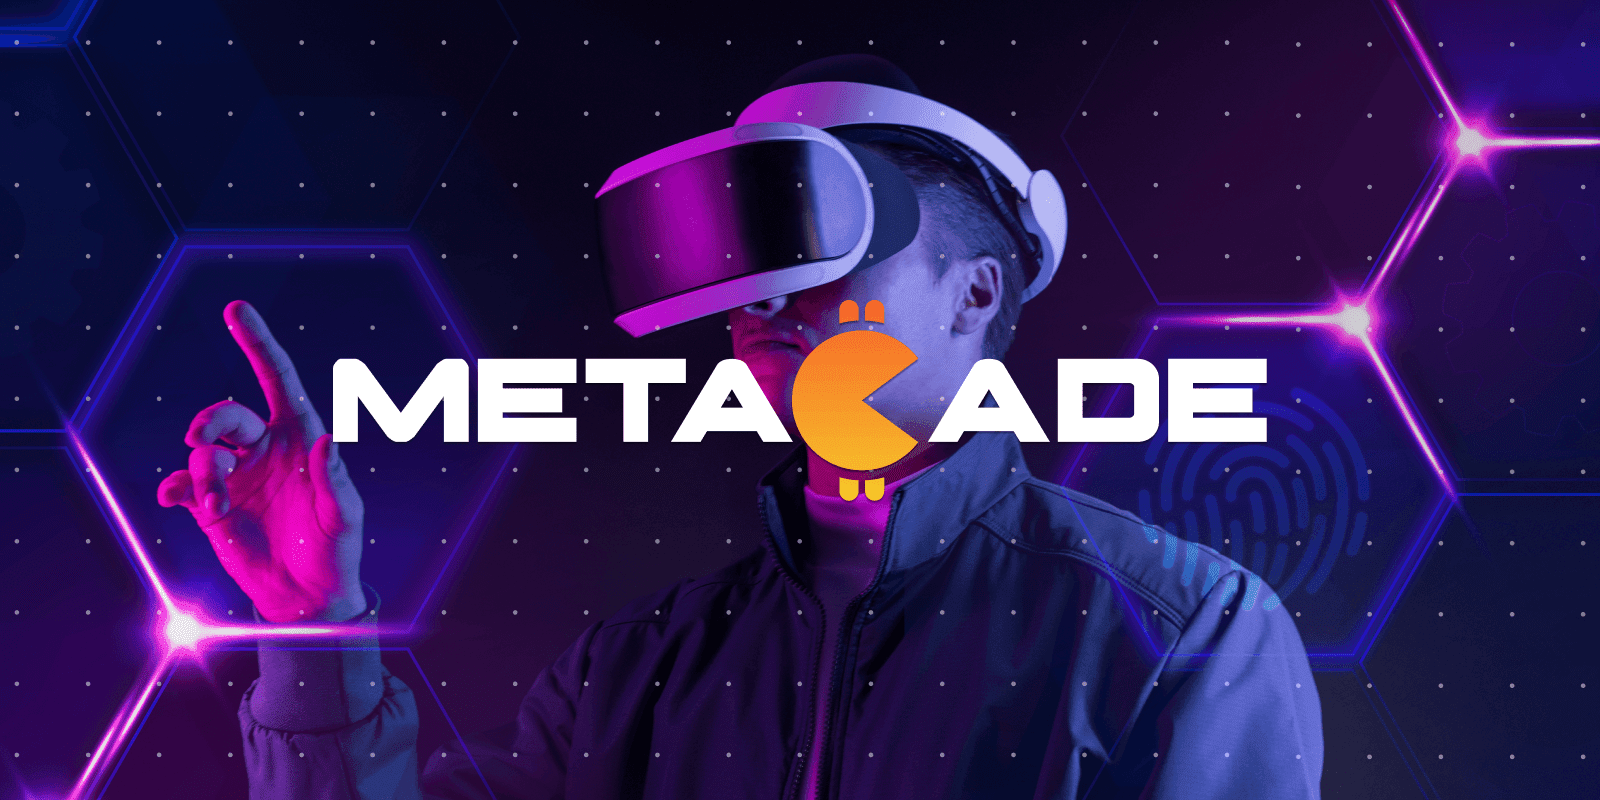 Metacade (MCADE) Offering Play-To-Earn Crypto Games and Has Plans for Future Job Creation